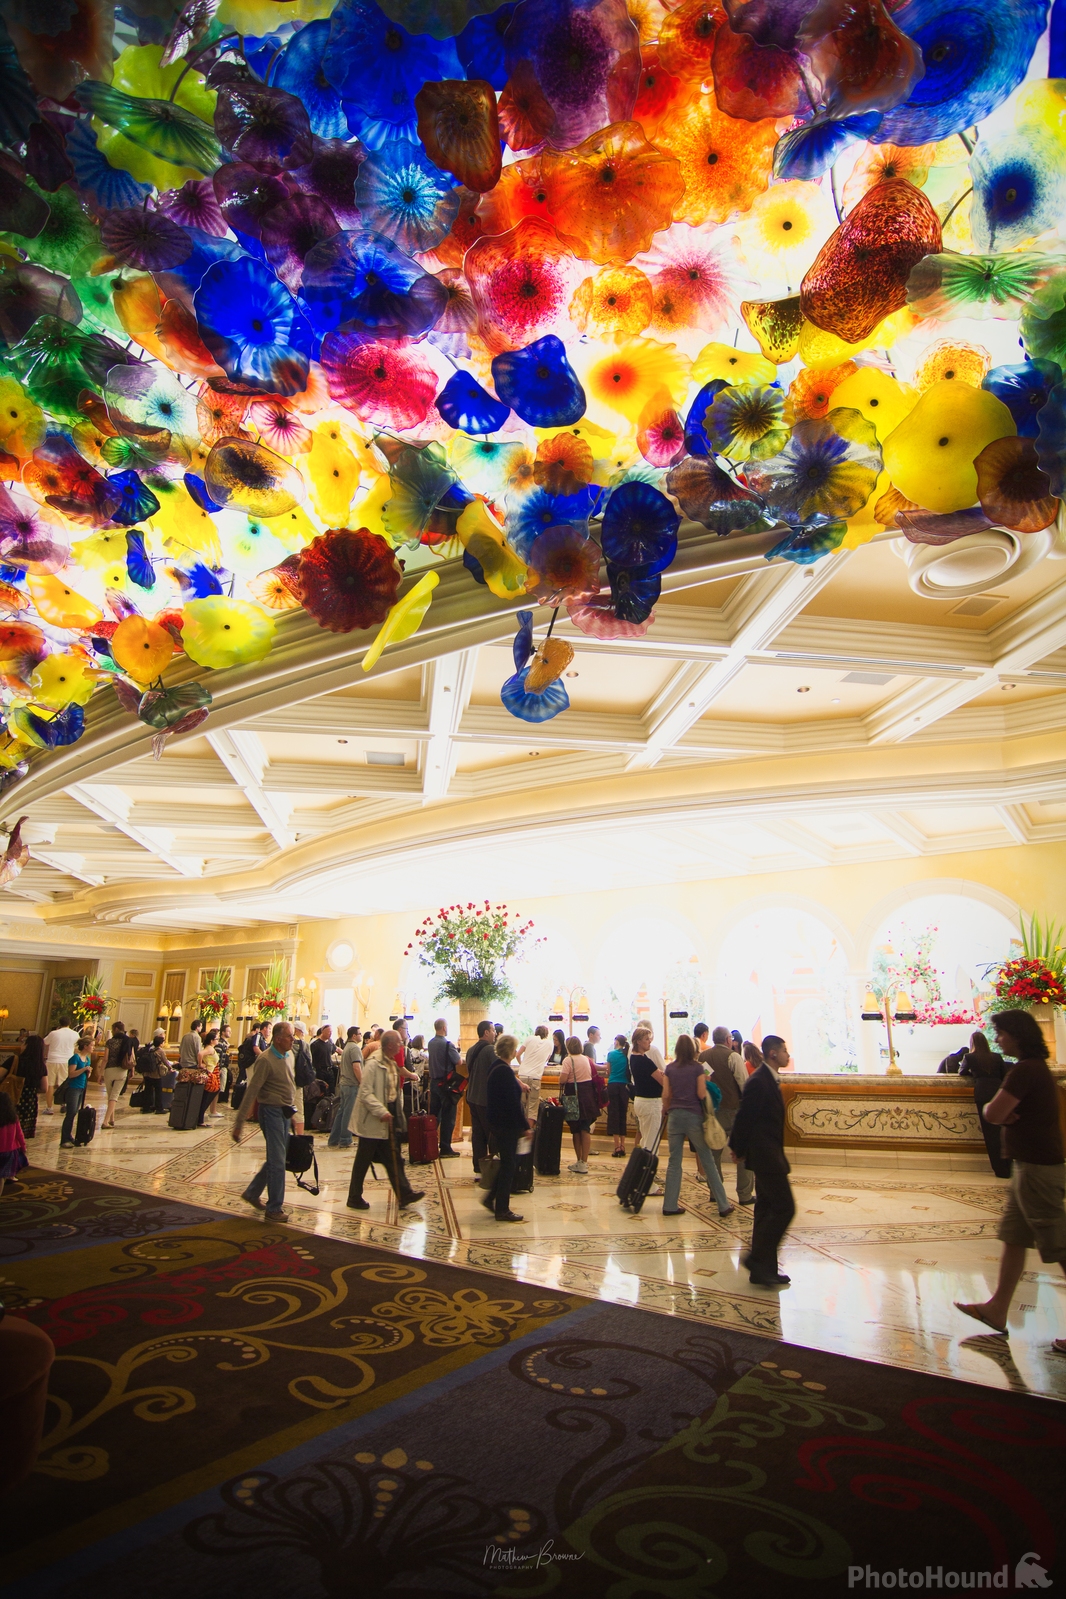 Image of Bellagio Lobby by Mathew Browne